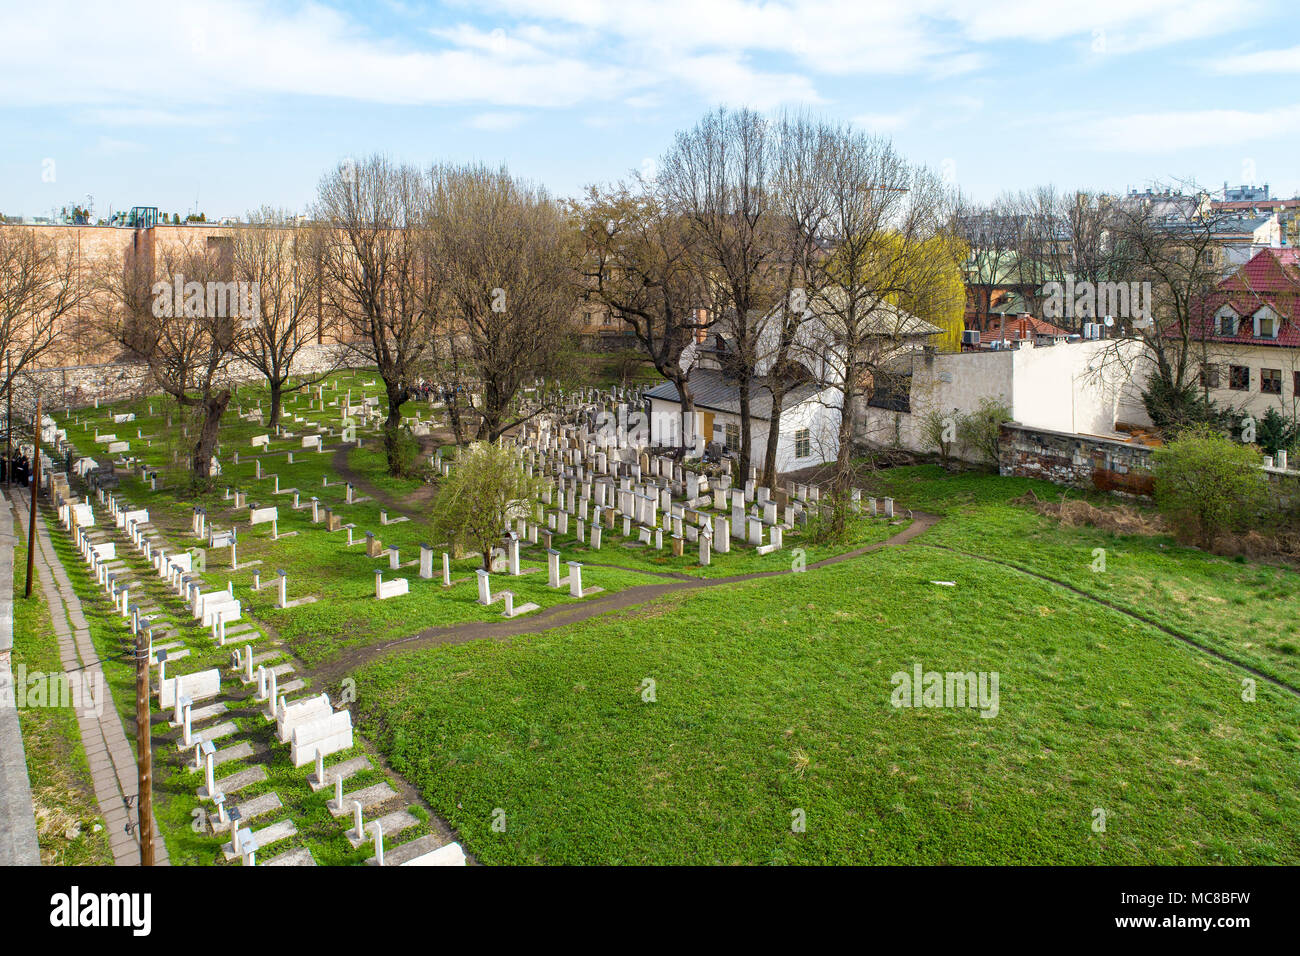 Old Jewish Remuh Cemetery and active Remah Synagogue in Kazimierz (Kuzmir), historic Jewish district in Krakow, Poland. Aerial view Stock Photo